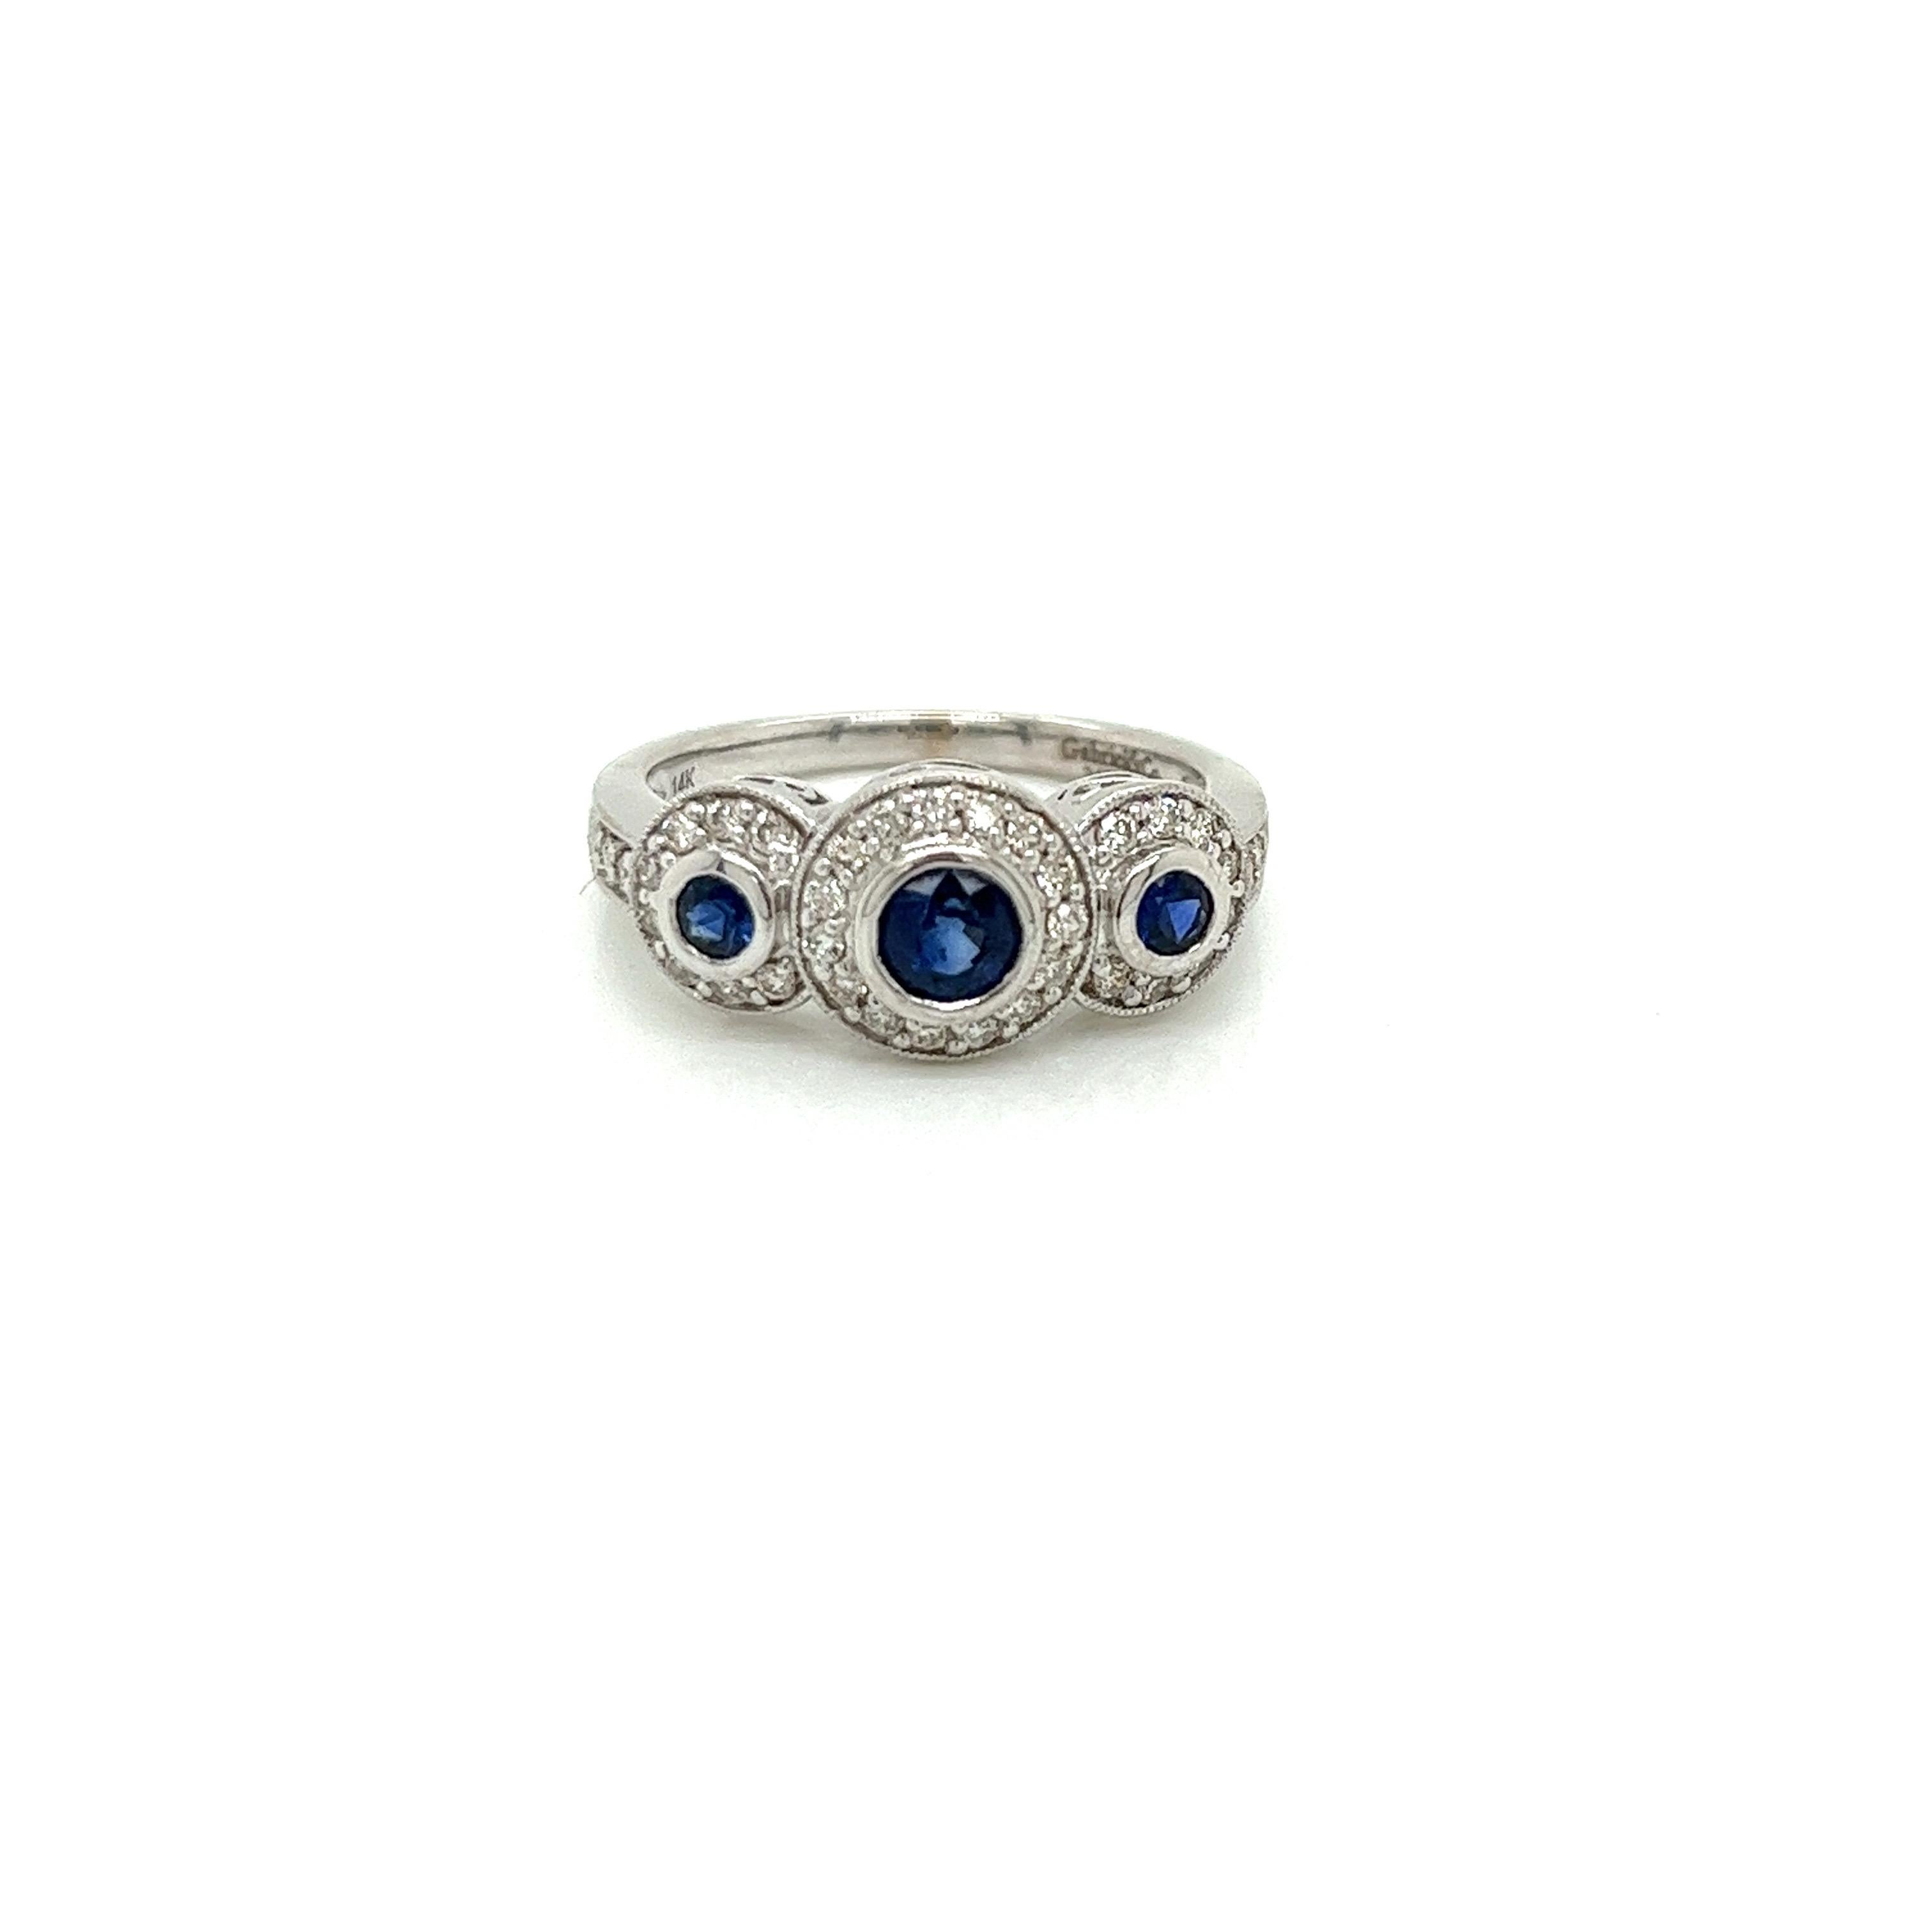 14K White Gold Sapphire and Diamond 3 stone Halo Ring. There are 3 round Ceylon Sapphires that weigh approximately .50ct with very fine blue color. A total of 35 round diamonds set in the halos and on the band weigh approximately .30ct with a